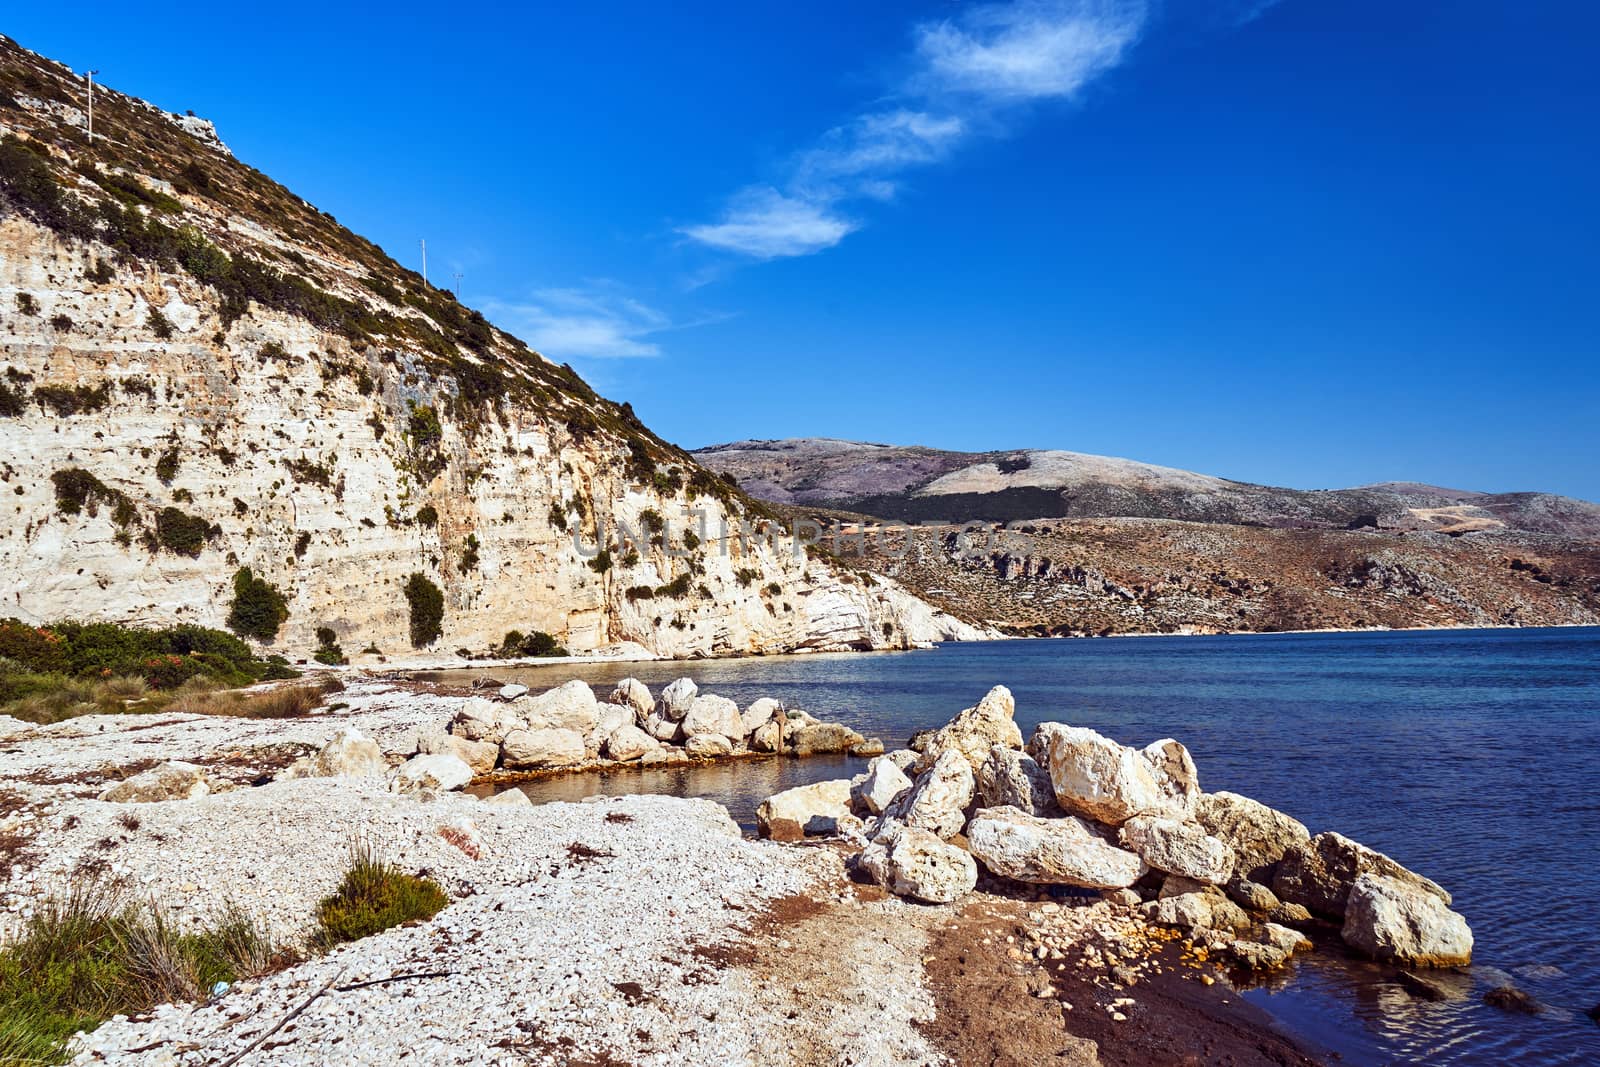 Rocky cliff and boulders in Paliki Bay on the island of Kefalonia in Greece